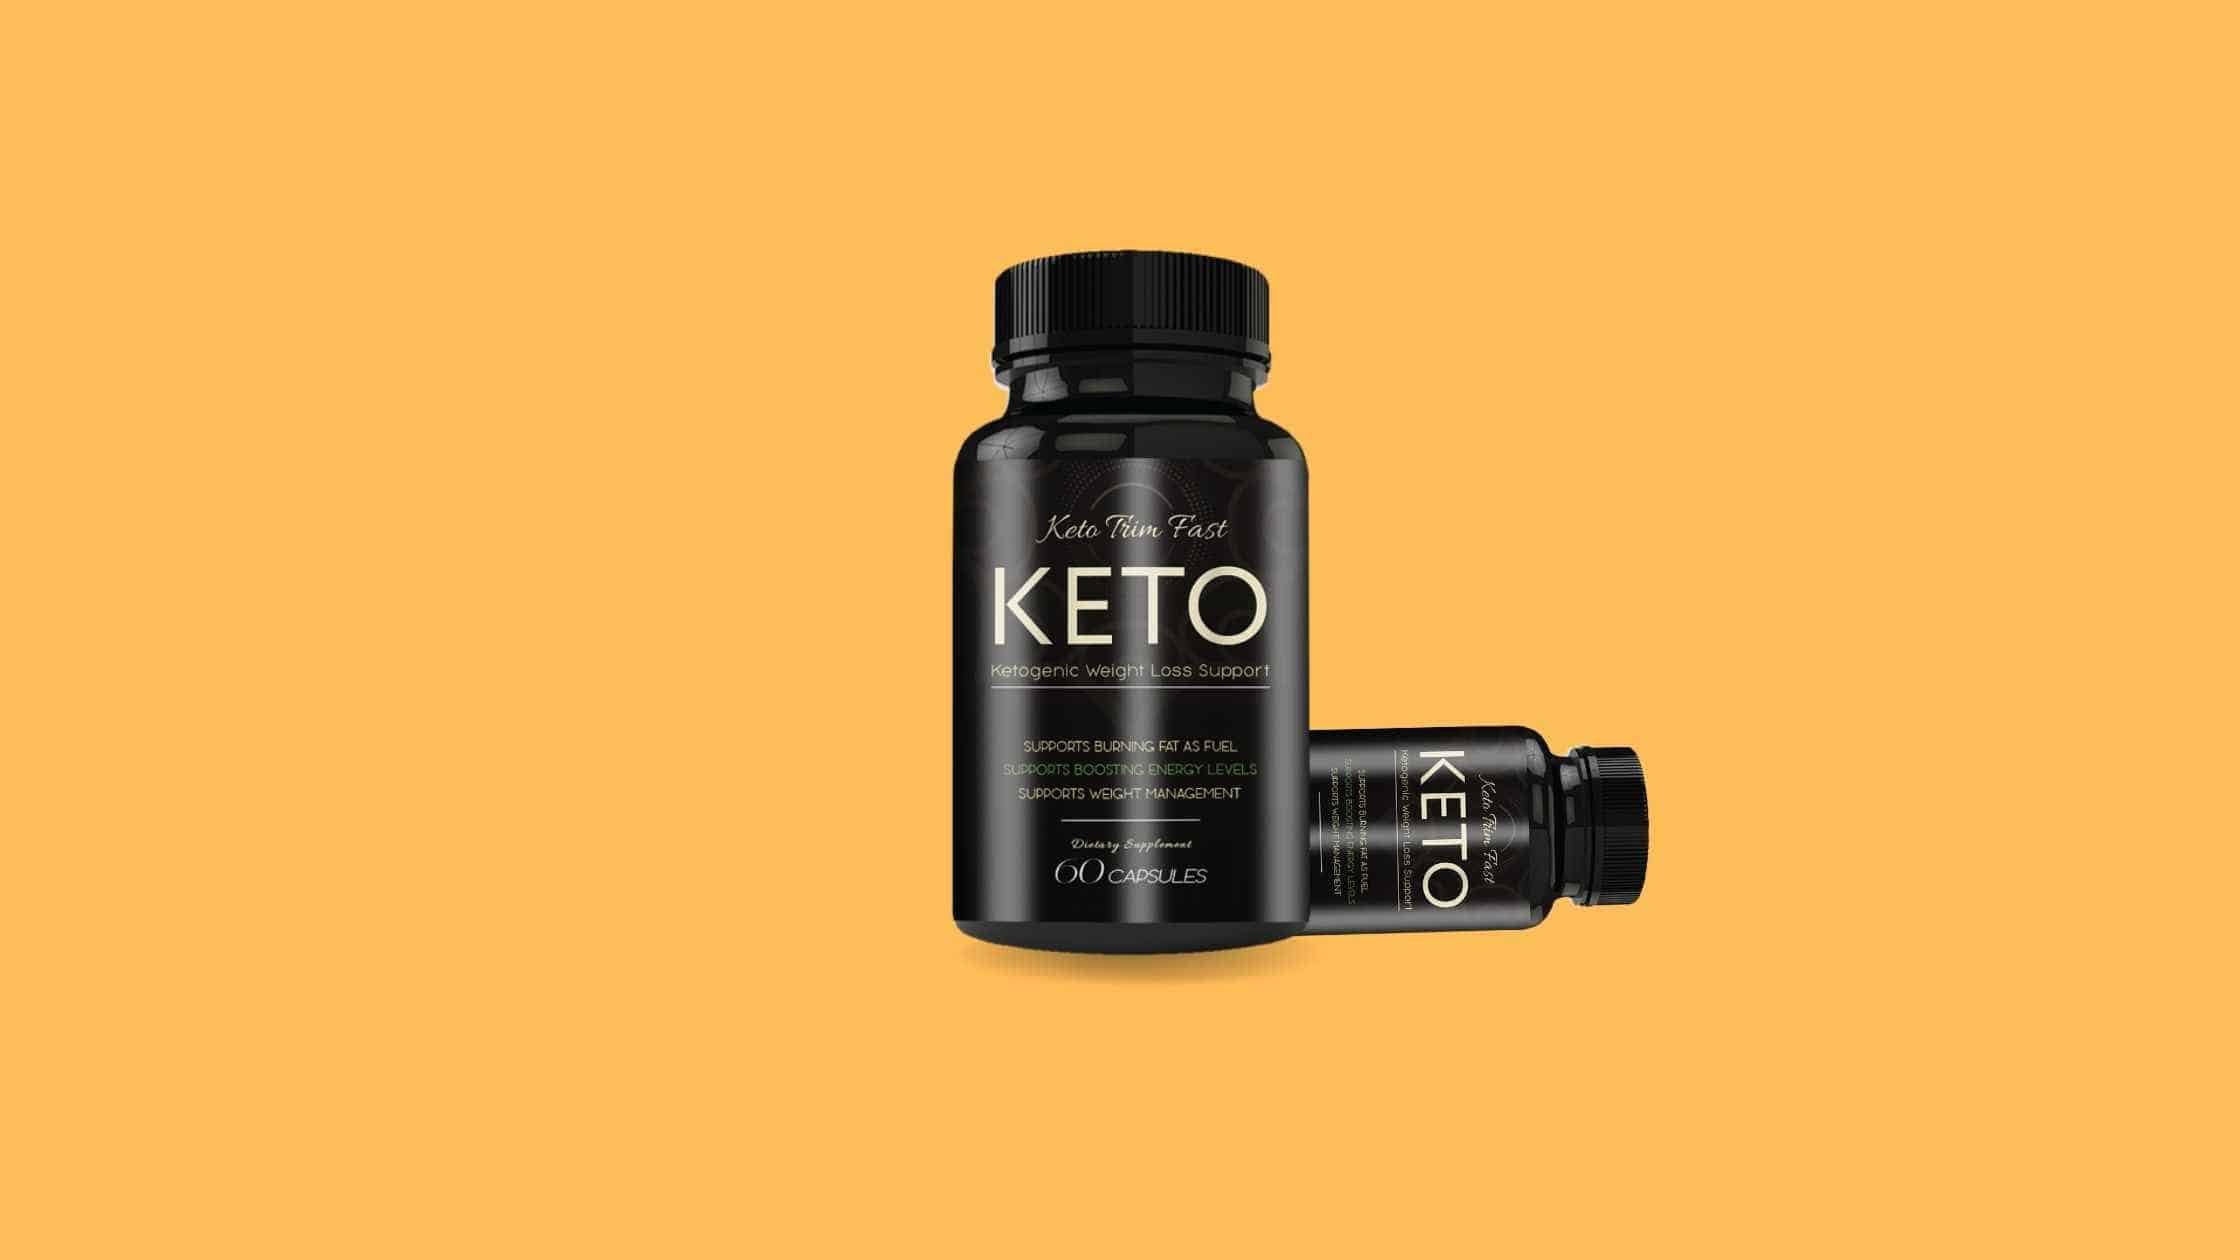 Keto Trim Fast Reviews - Is It An Effective Solution For Rapid Weight Loss?